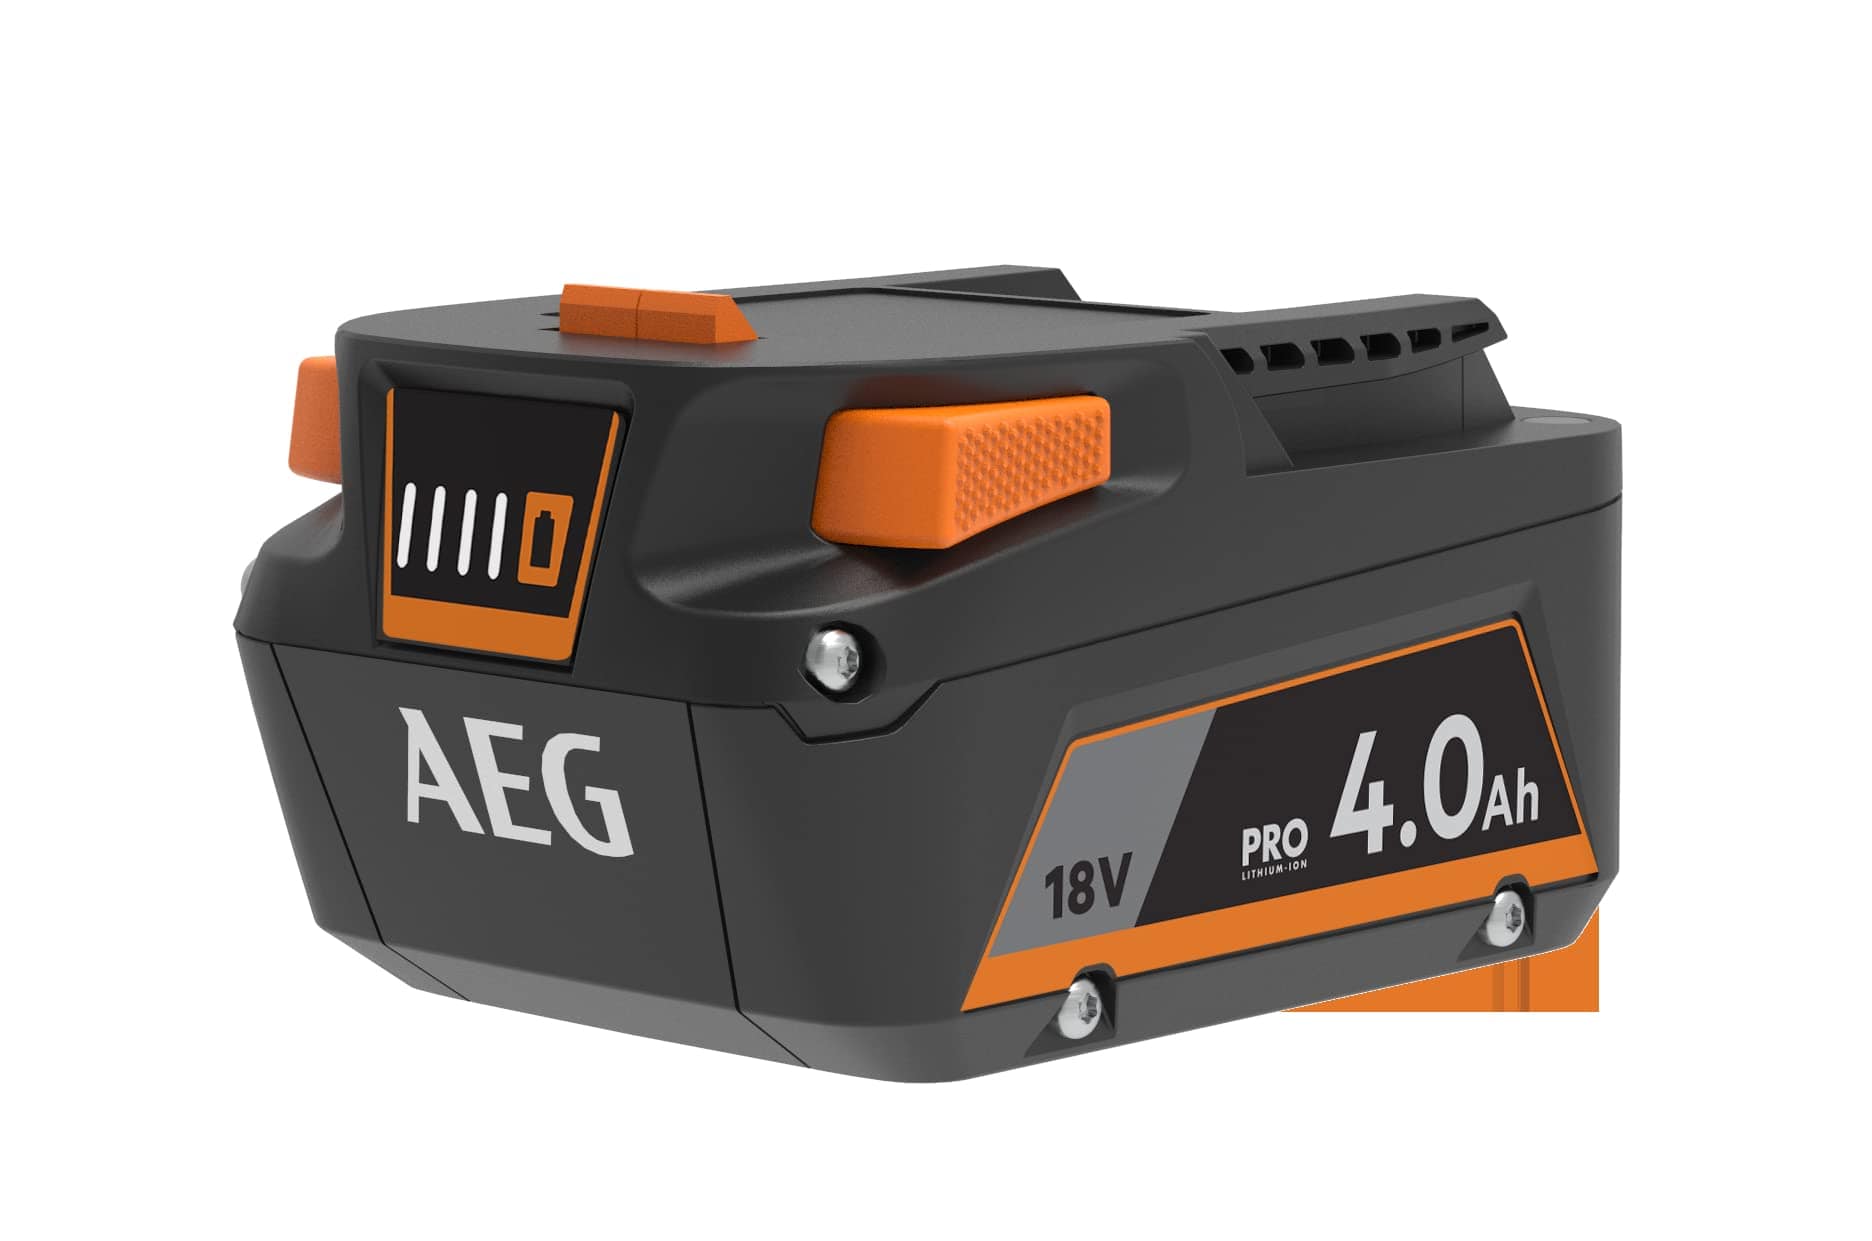 AEG 18V 4.0Ah Pro Lithium-Ion Battery Pack (Model L1840S) - Reliable Power for AEG Cordless Tools | Supply Master Batteries & Chargers Buy Tools hardware Building materials